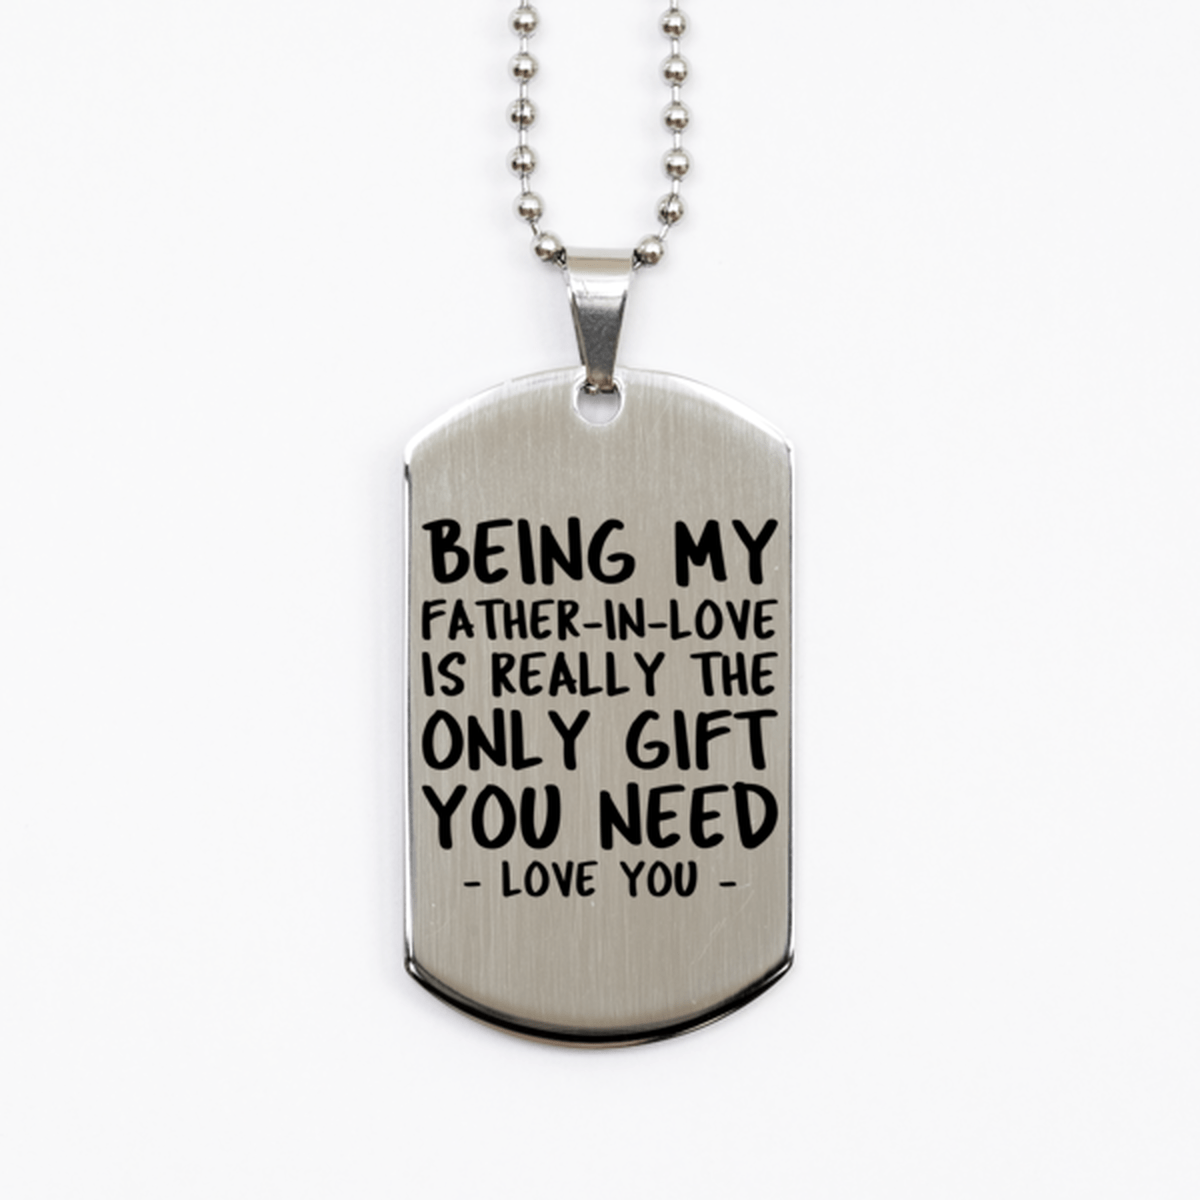 Funny Father-in-love Silver Dog Tag Necklace, Being My Father-in-love Is Really the Only Gift You Need, Best Birthday Gifts for Father-in-love